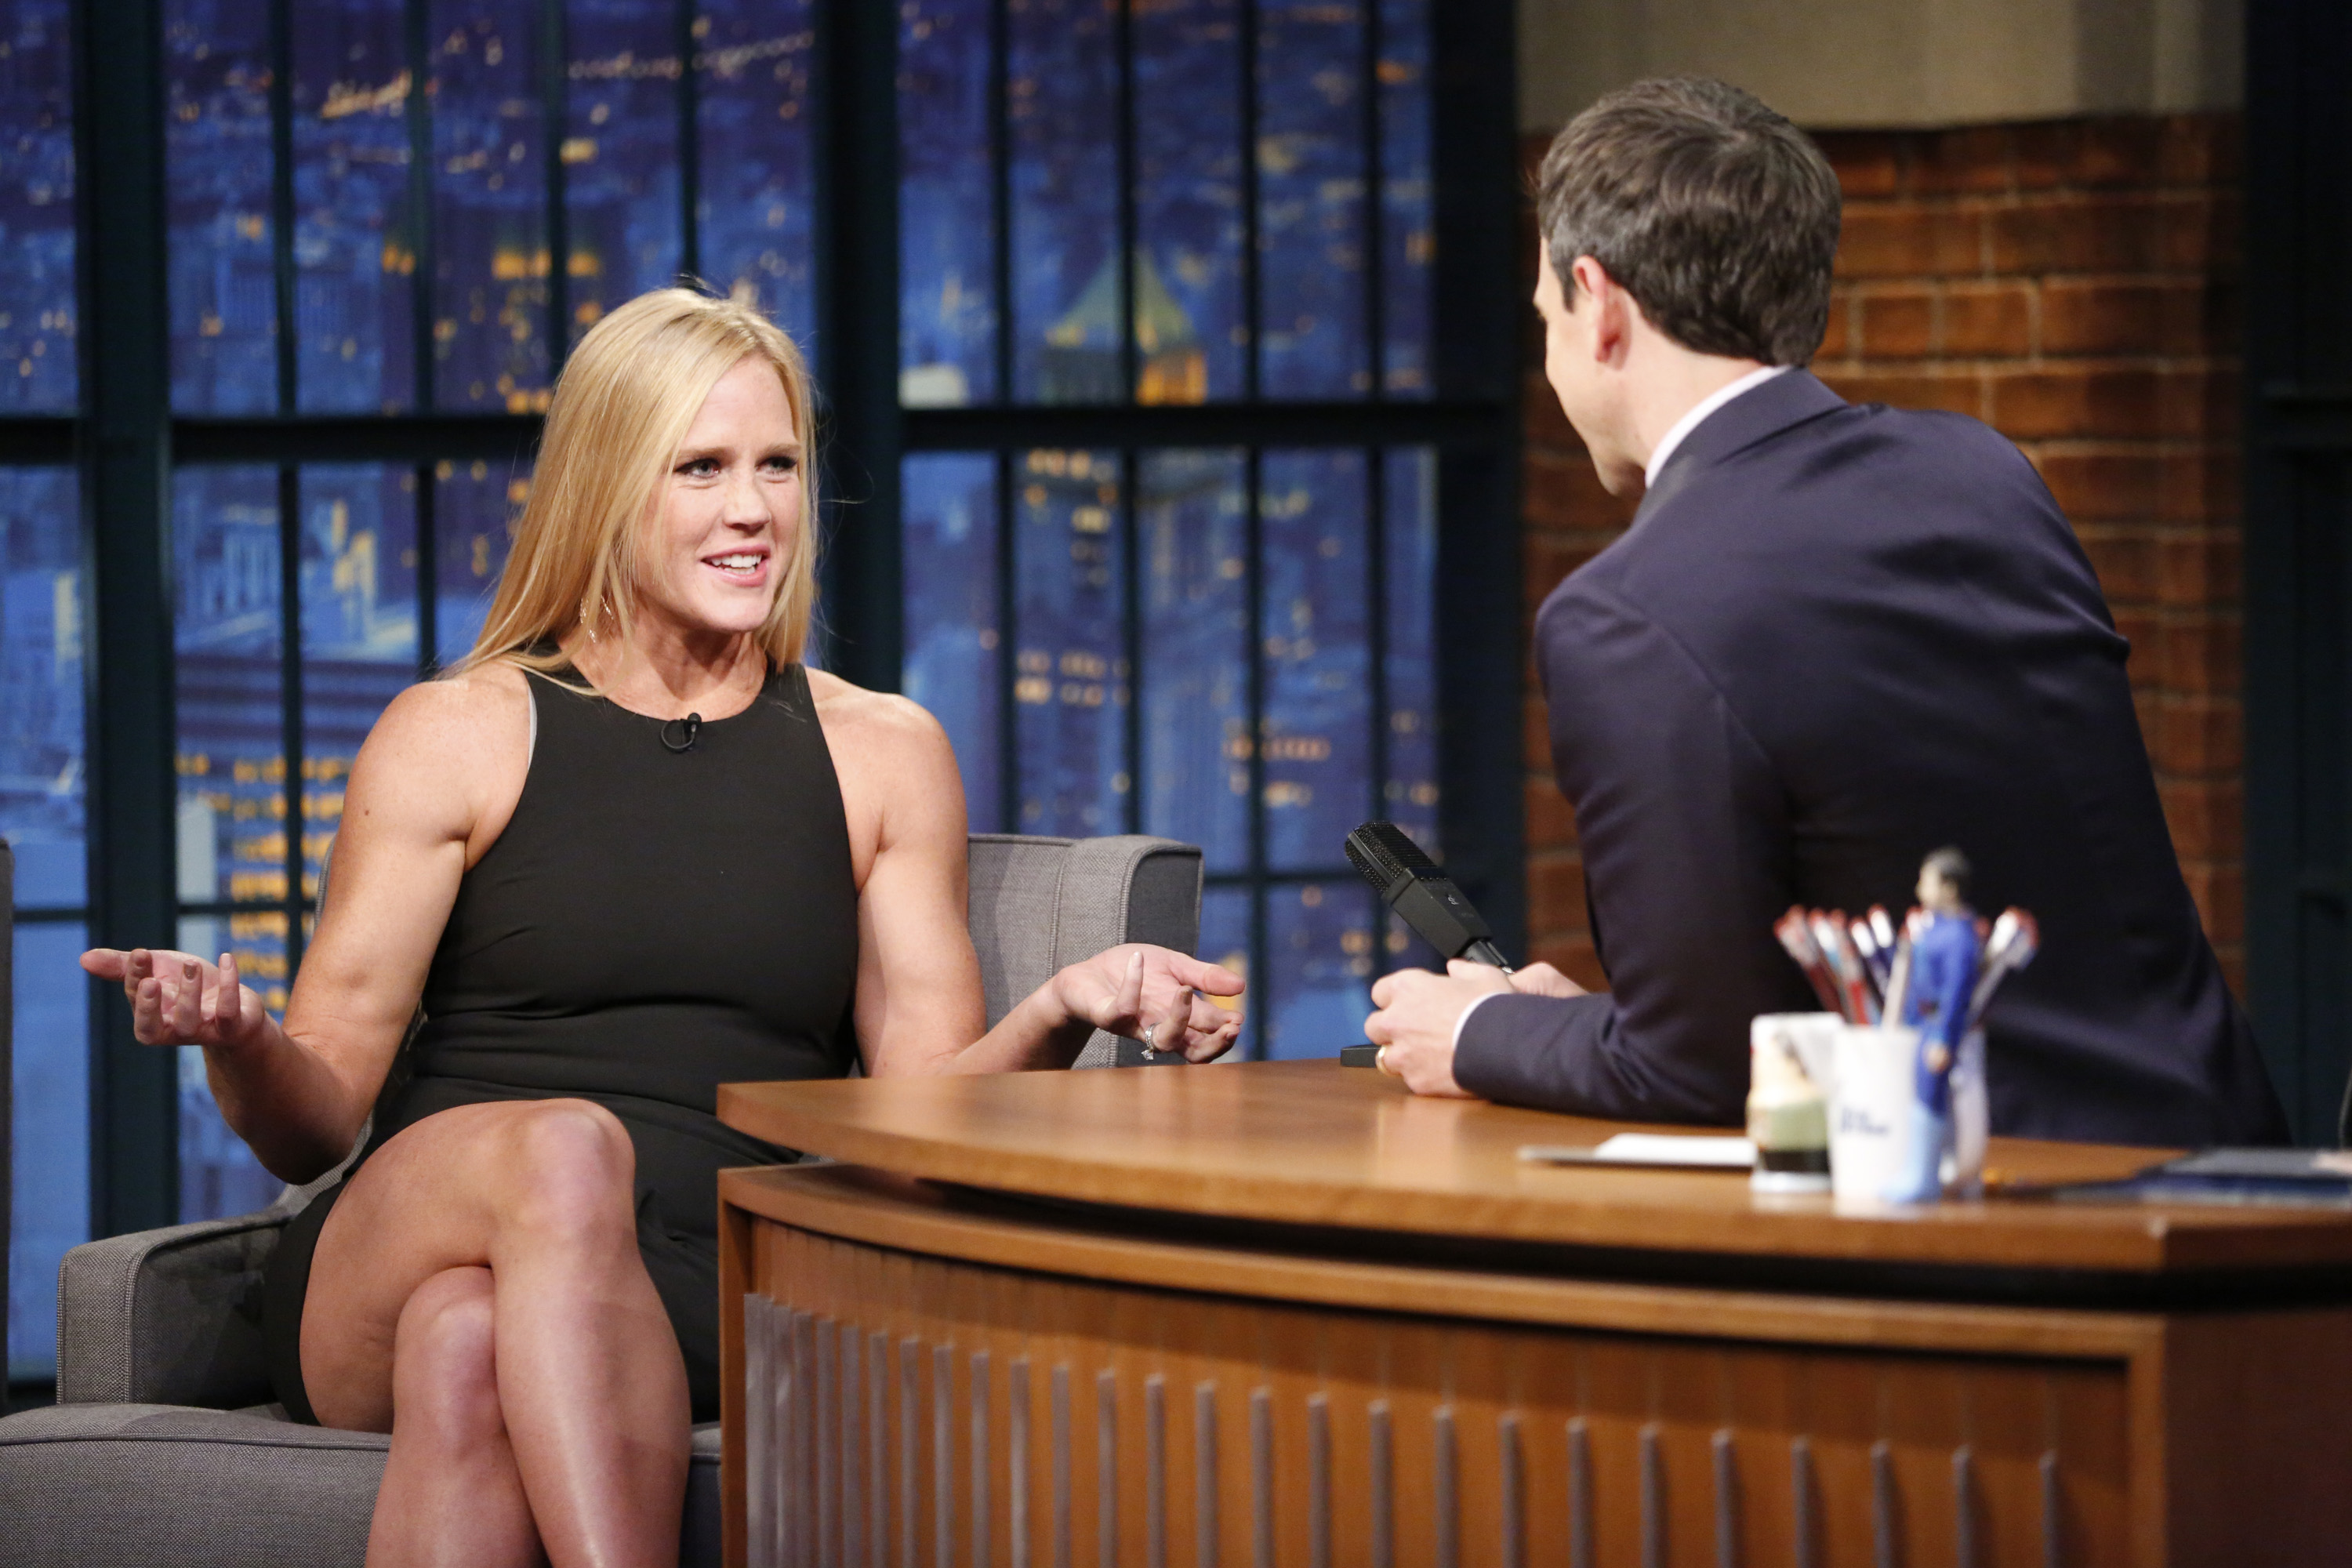 Pictured: (l-r) Holly Holm, UFC Women's Bantamweight Champion, during an interview with host Seth Meyers on November 18, 2015. (NBC—NBCU Photo Bank via Getty Images)